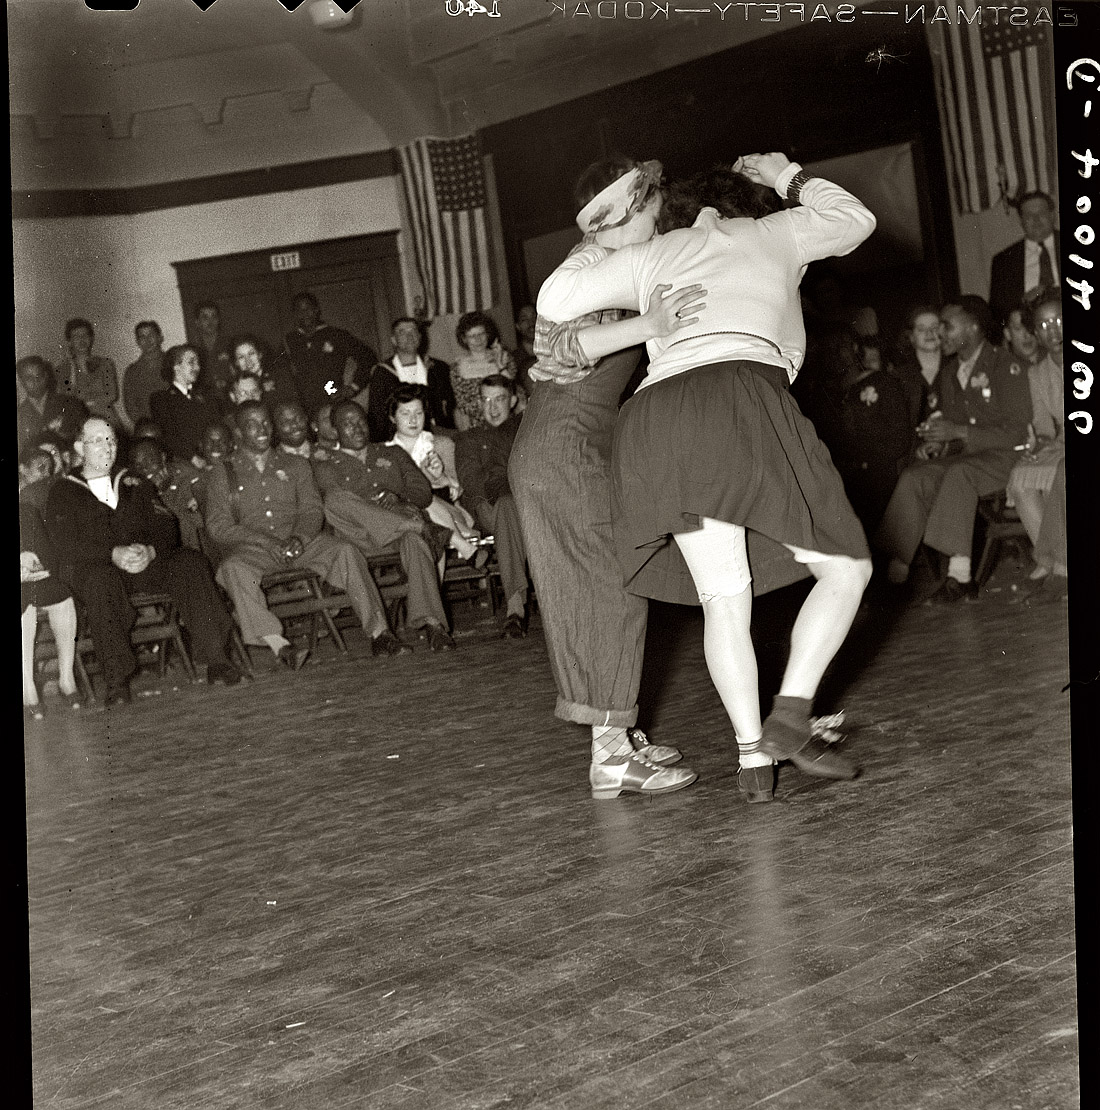 March 1944. Washington, D.C. St. Patrick's Day dance at the Washington labor canteen, sponsored by the United Federal Workers of America, Congress of Industrial Organizations. View full size. Medium format safety negative by Joseph A. Horne for the Office of War Information.